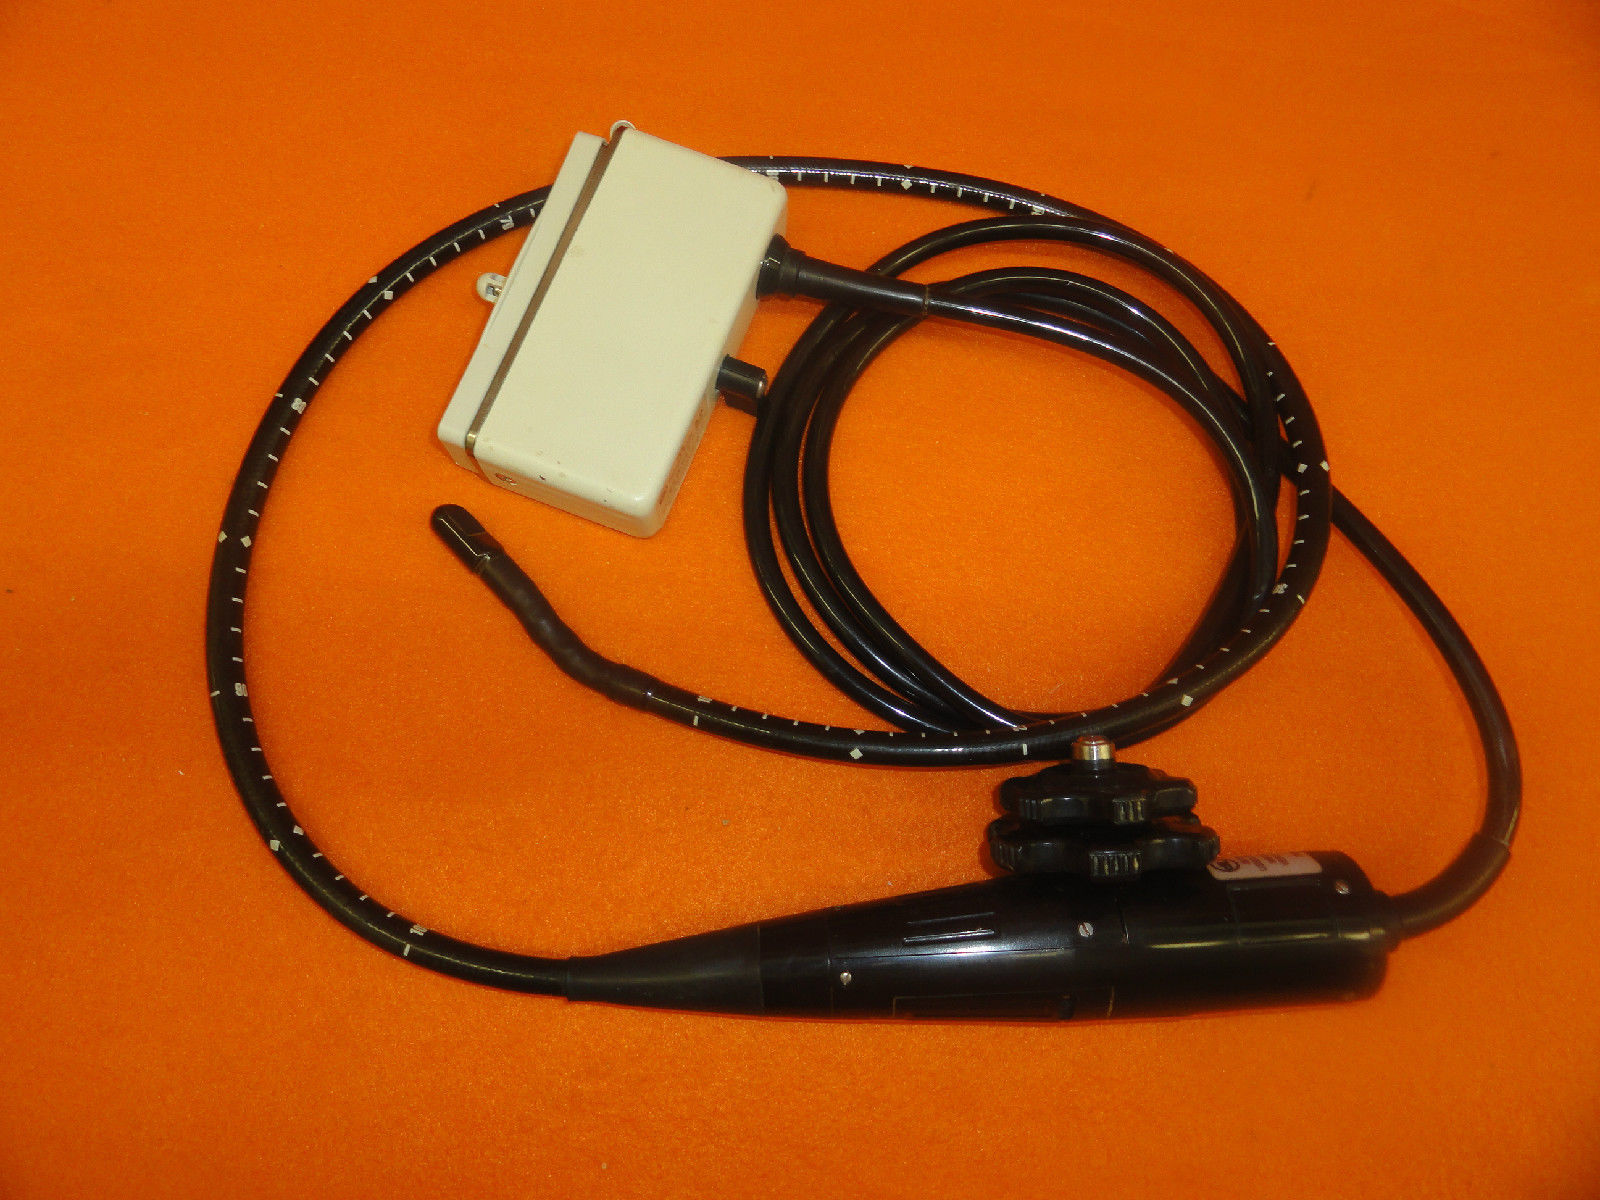 ATL Phased Array 5.0 MHz Single Plane Transesophageal (TEE) Probe (5583 ) DIAGNOSTIC ULTRASOUND MACHINES FOR SALE